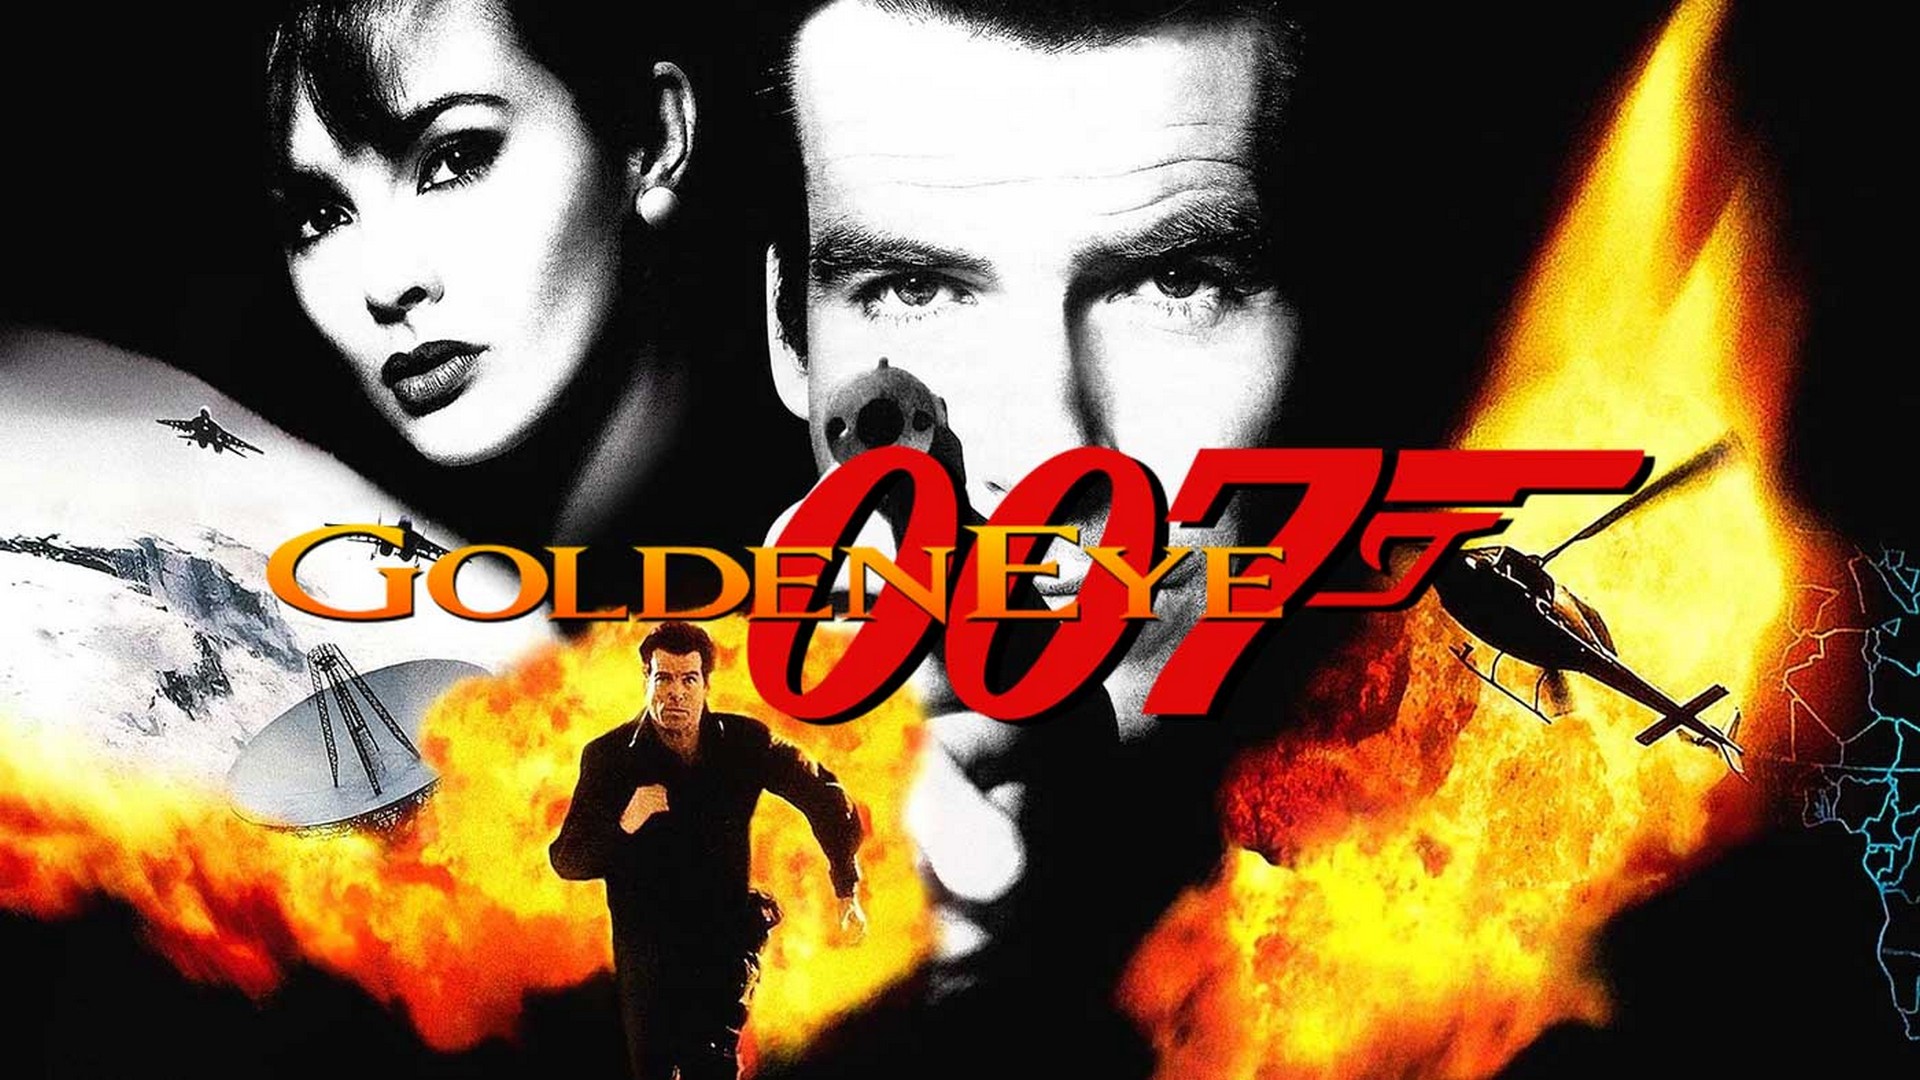 GoldenEye 007 Shakes Up the Action for Nintendo Switch Online +